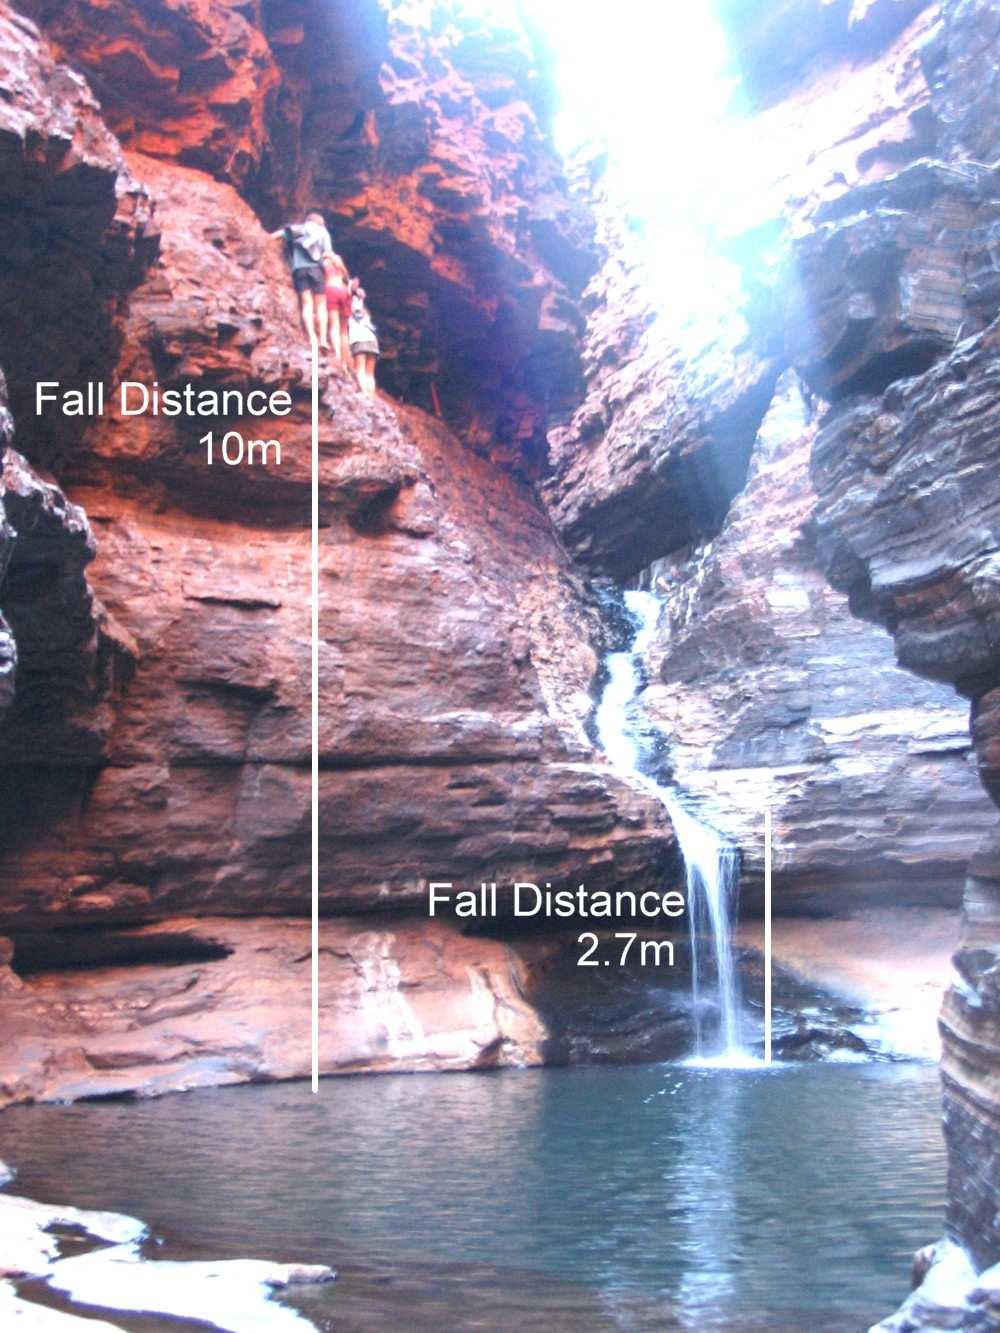 Summary of the Route This section is a canyoning route requiring rock climbing including traversing the gorge walls and/or abseiling, swimming in cold water, bouldering up and down short drops on